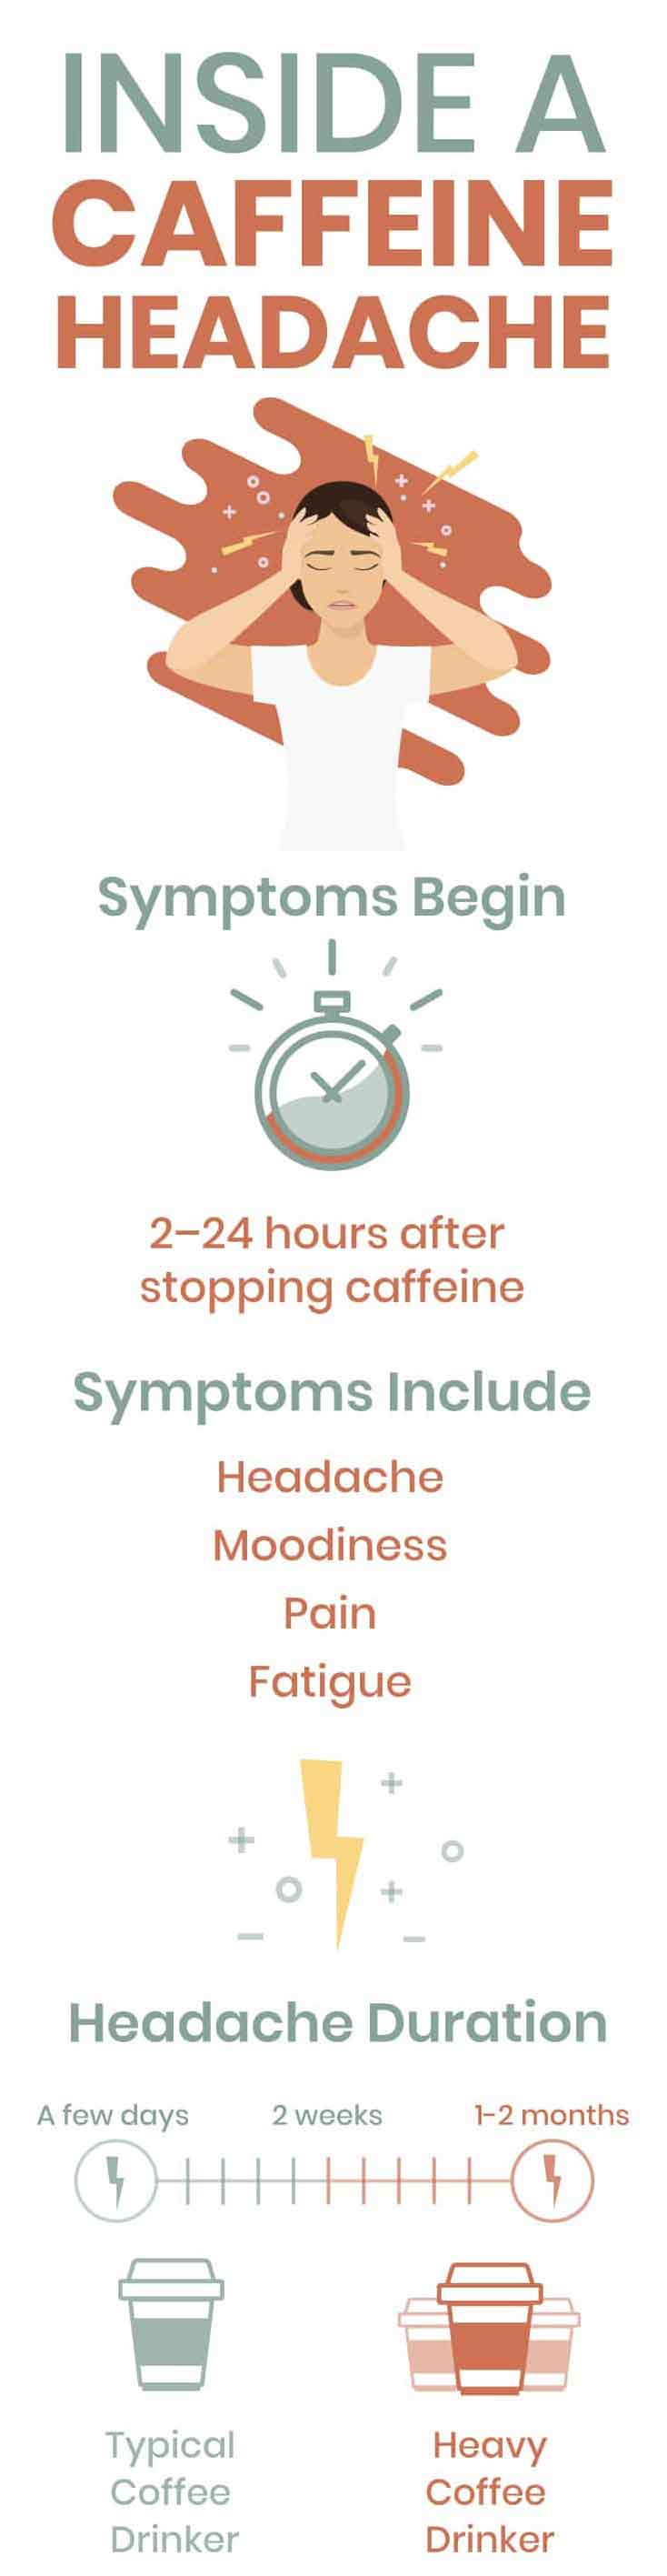 Can Caffeine Withdrawal Cause Migraines?